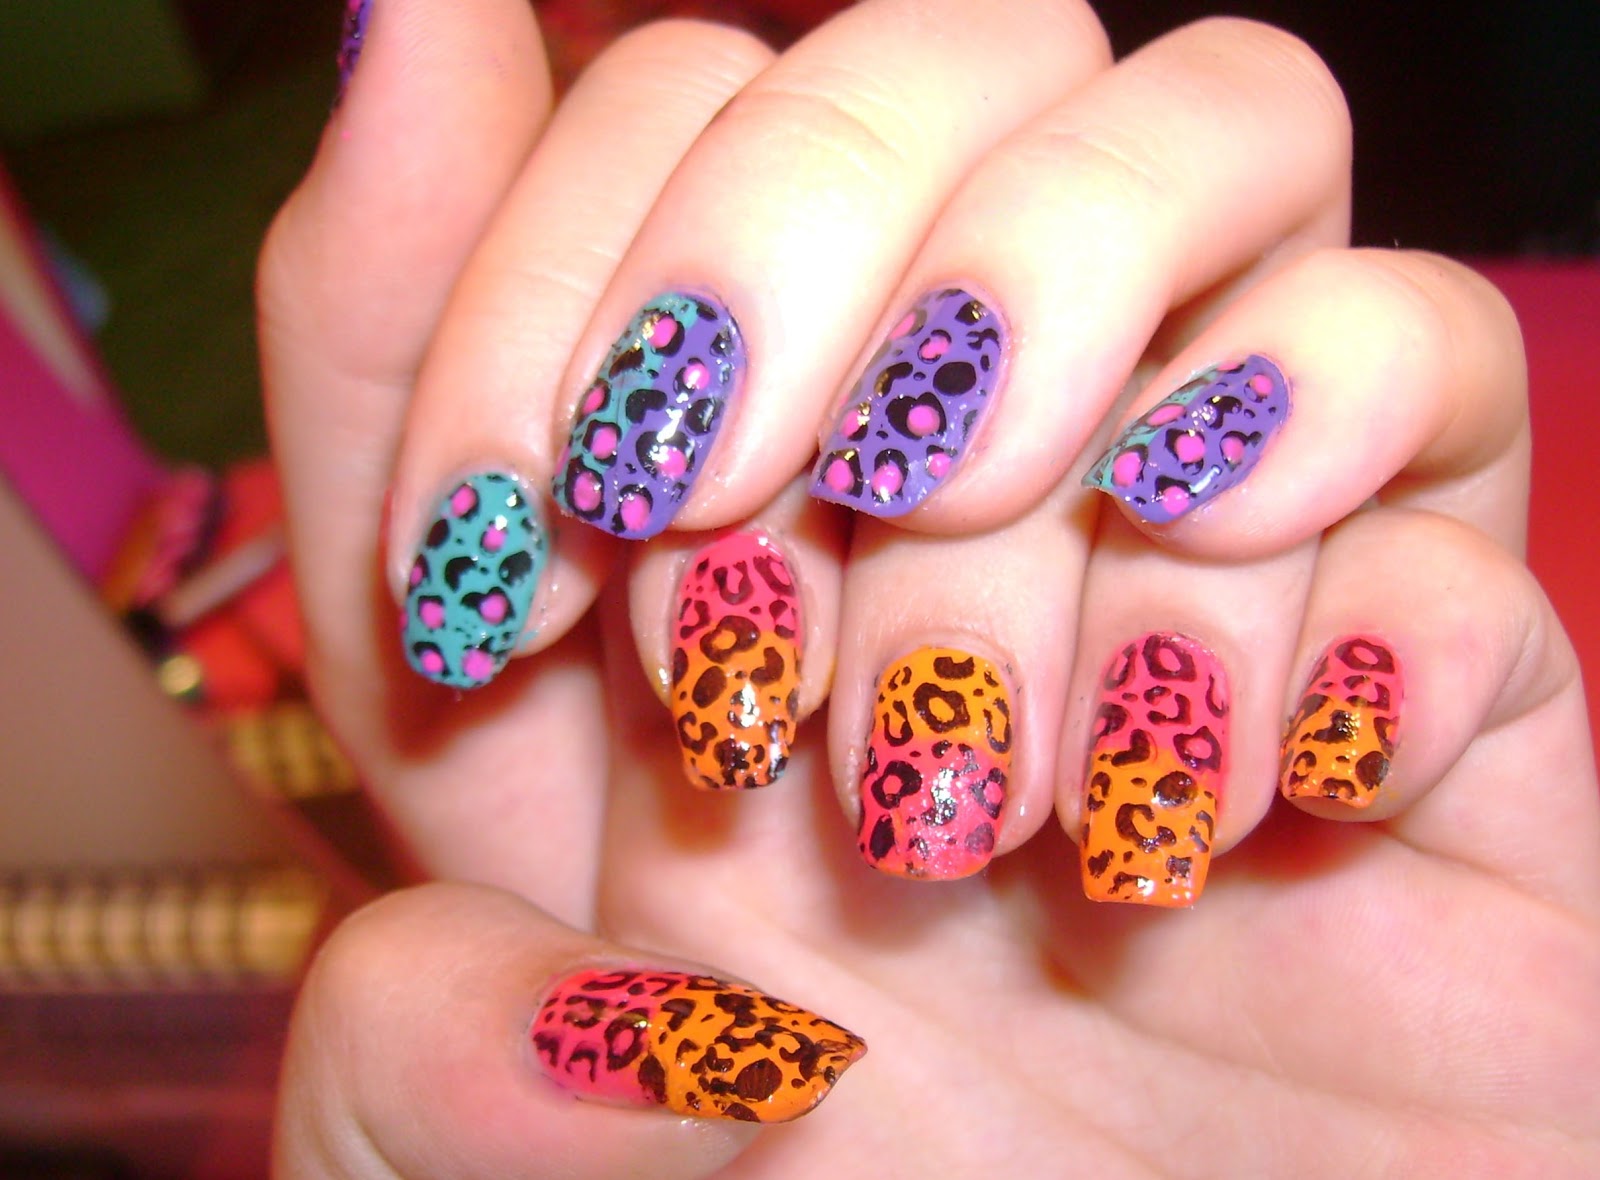 3. 10 Stunning Snake Print Nail Designs to Try Right Now - wide 7